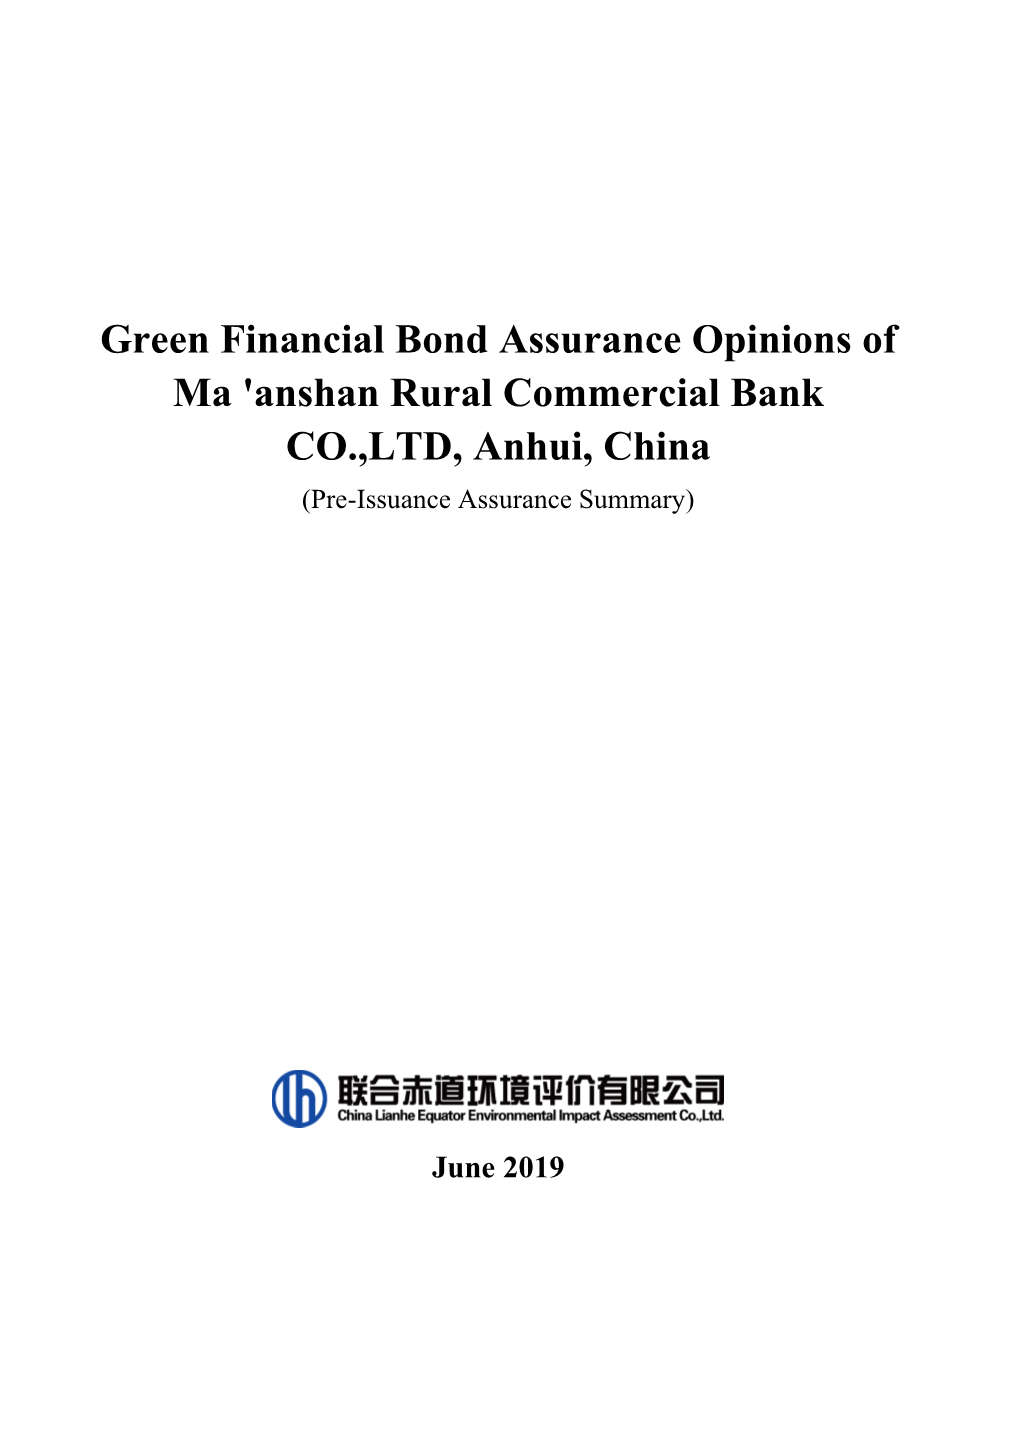 Green Financial Bond Assurance Opinions of Ma 'Anshan Rural Commercial Bank CO.,LTD, Anhui, China (Pre-Issuance Assurance Summary)